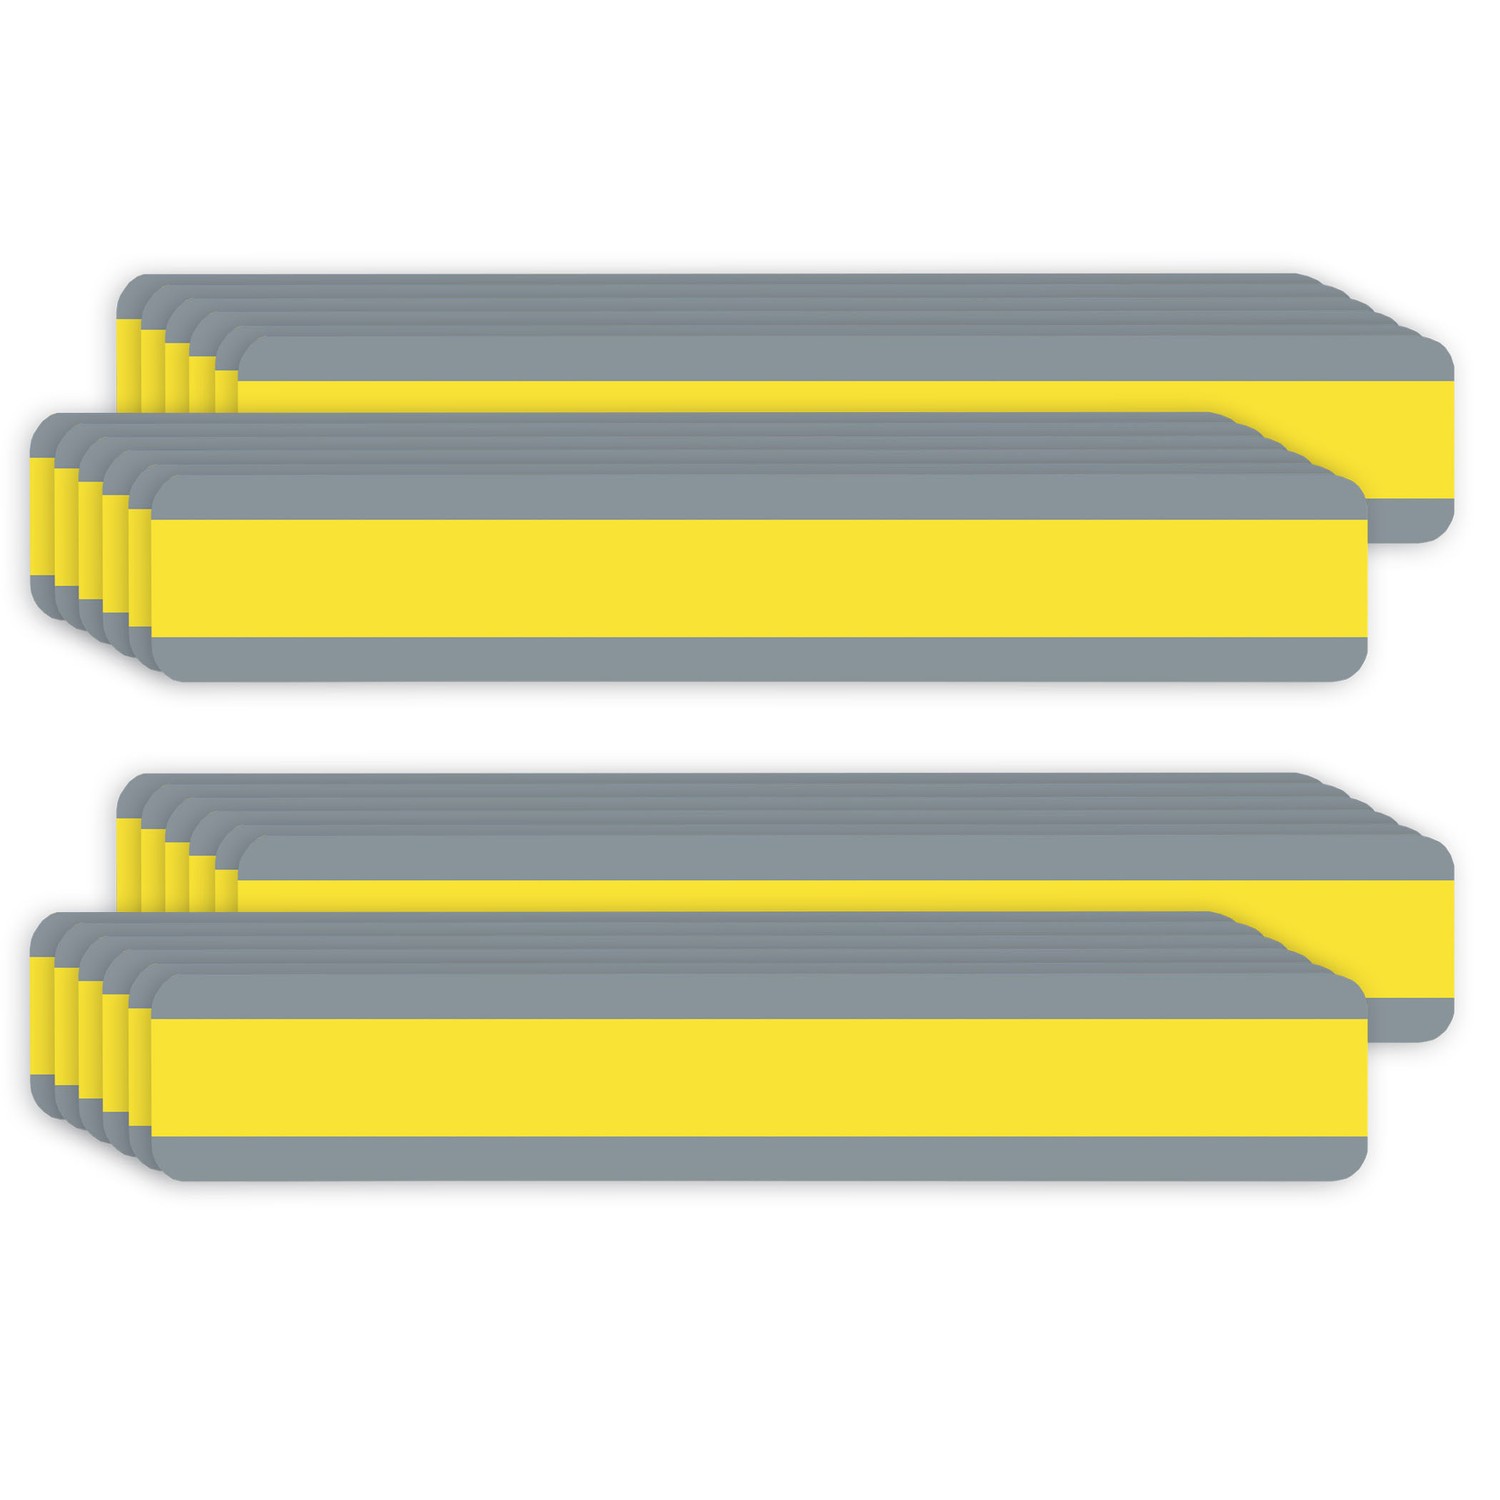 Double Wide Sentence Strip Reading Guide, 1-1/4" x 7-1/4", Yellow, 12 Per Pack, 2 Packs